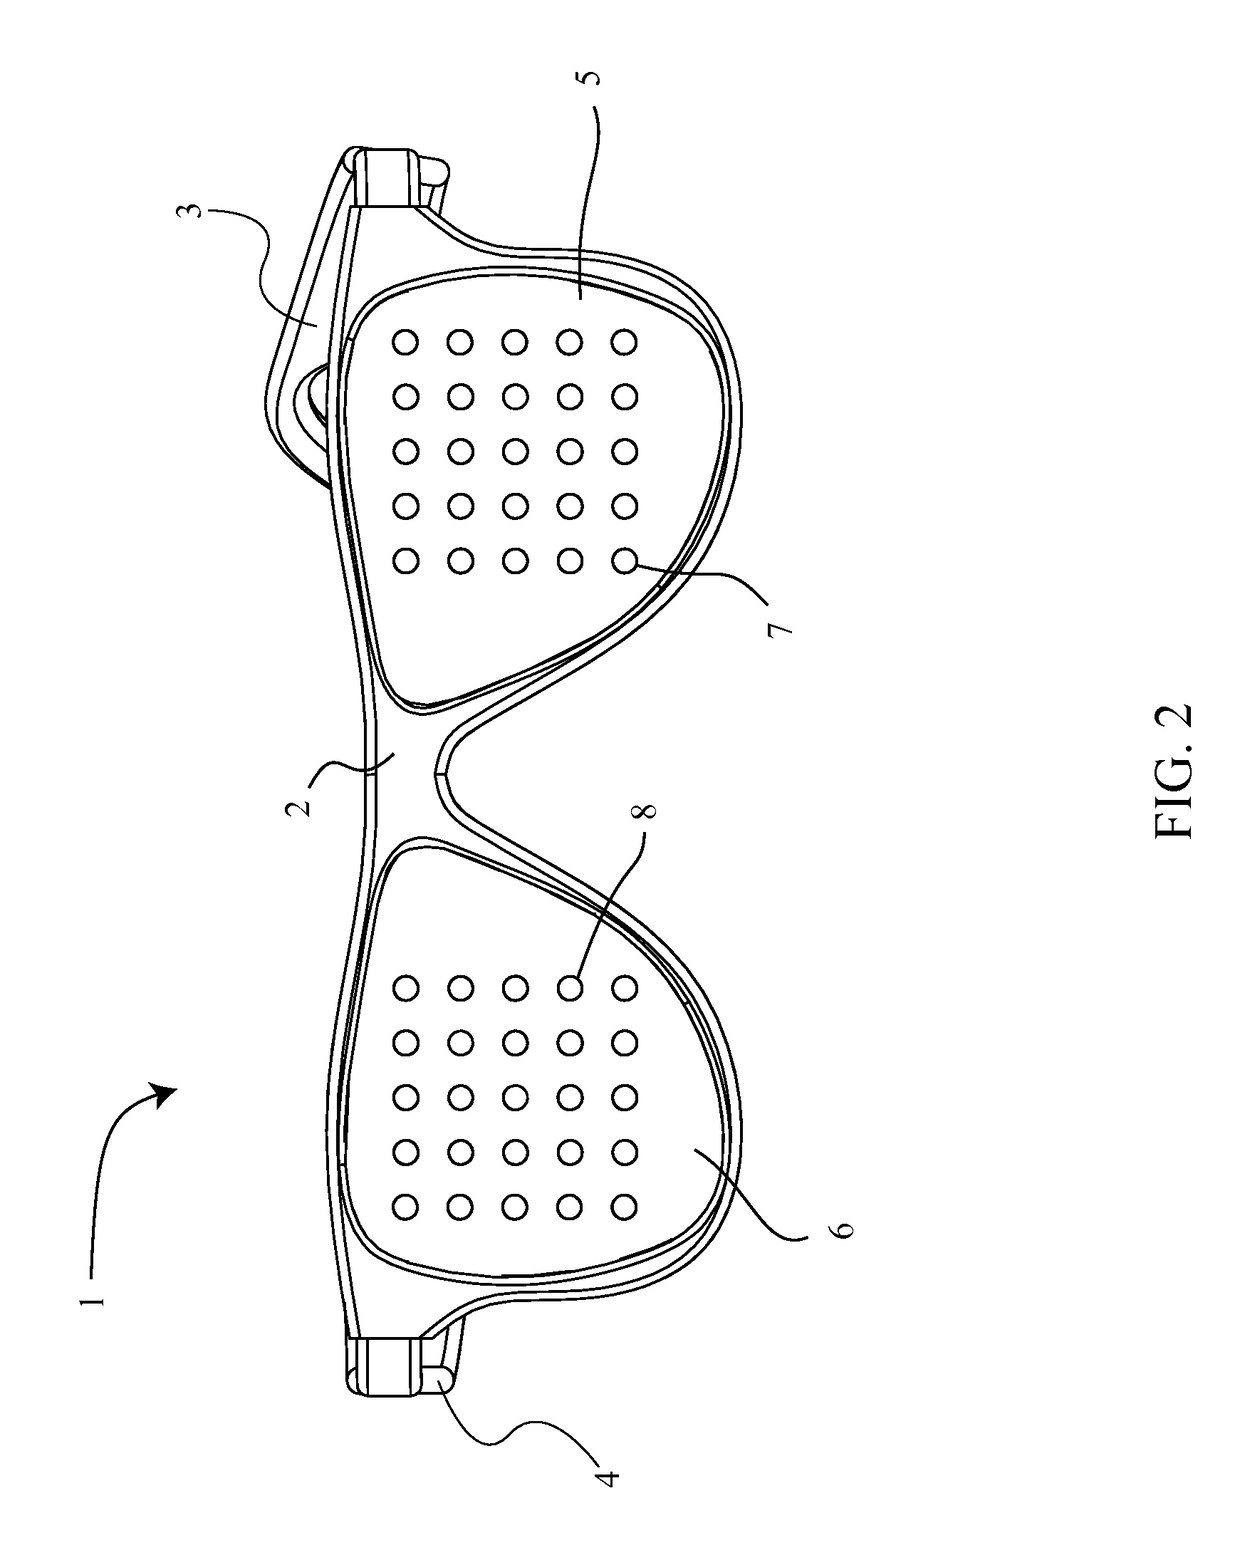 Eyewear with a pair of light emitting diode matrices